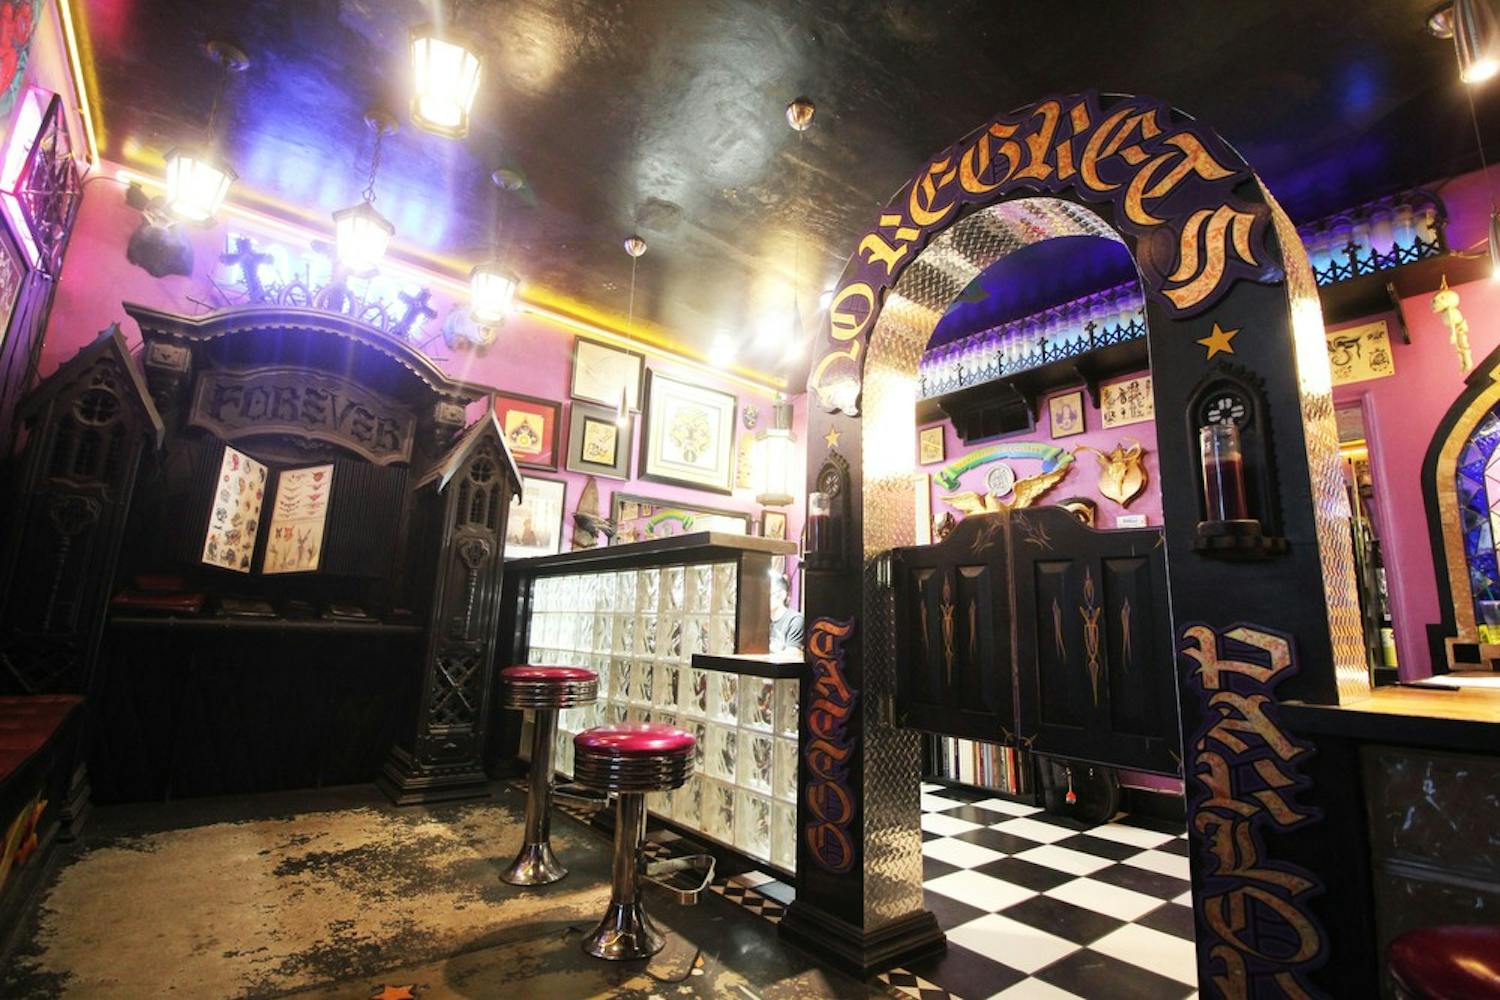 The interior of No Regrets Tattoo Parlor is pictured on Tuesday, Nov. 24, 2015, in Tempe.